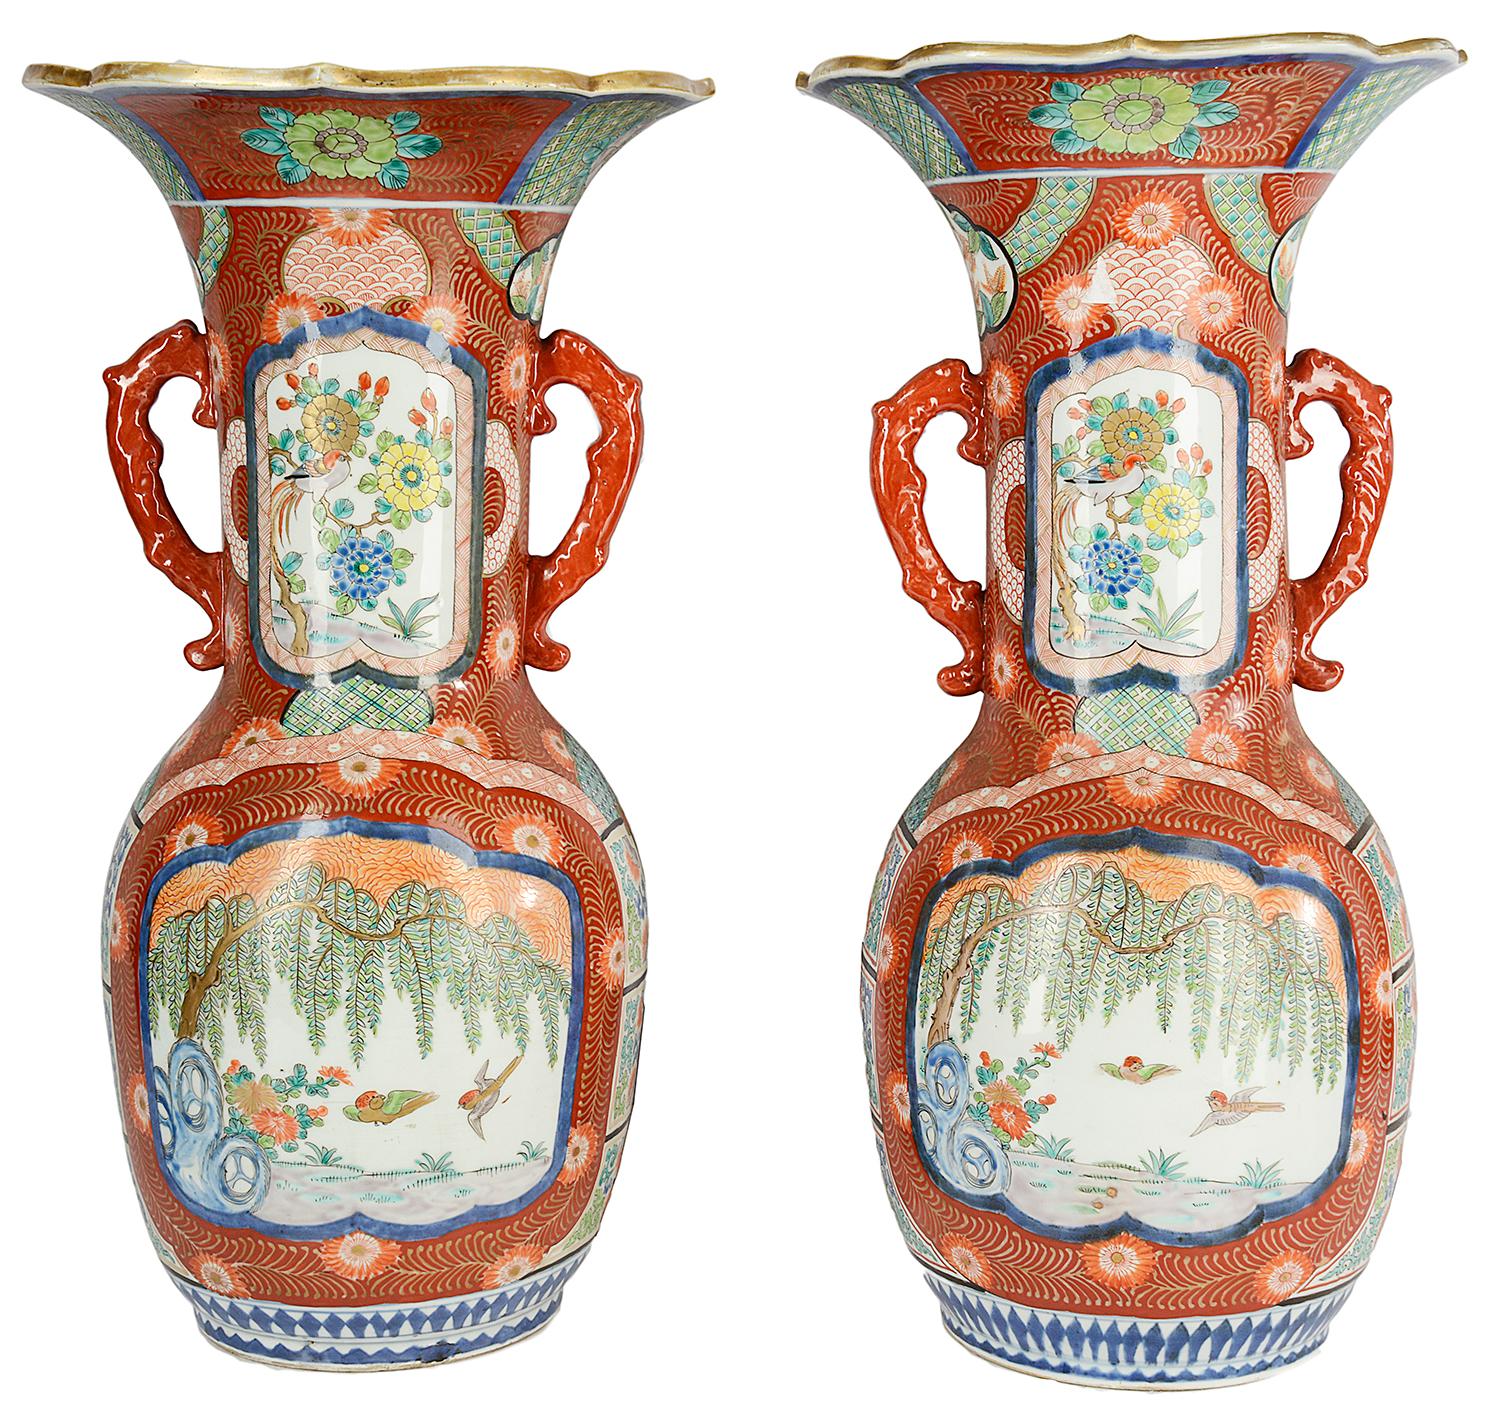 A very decorative and impressive Meiji period (1868-1912) Japanese Kutani flare necked twin handle vases. Each with orange ground feather decoration, inset painted panels with blossom trees, birds and flowers.
This pair of vases we can convert to